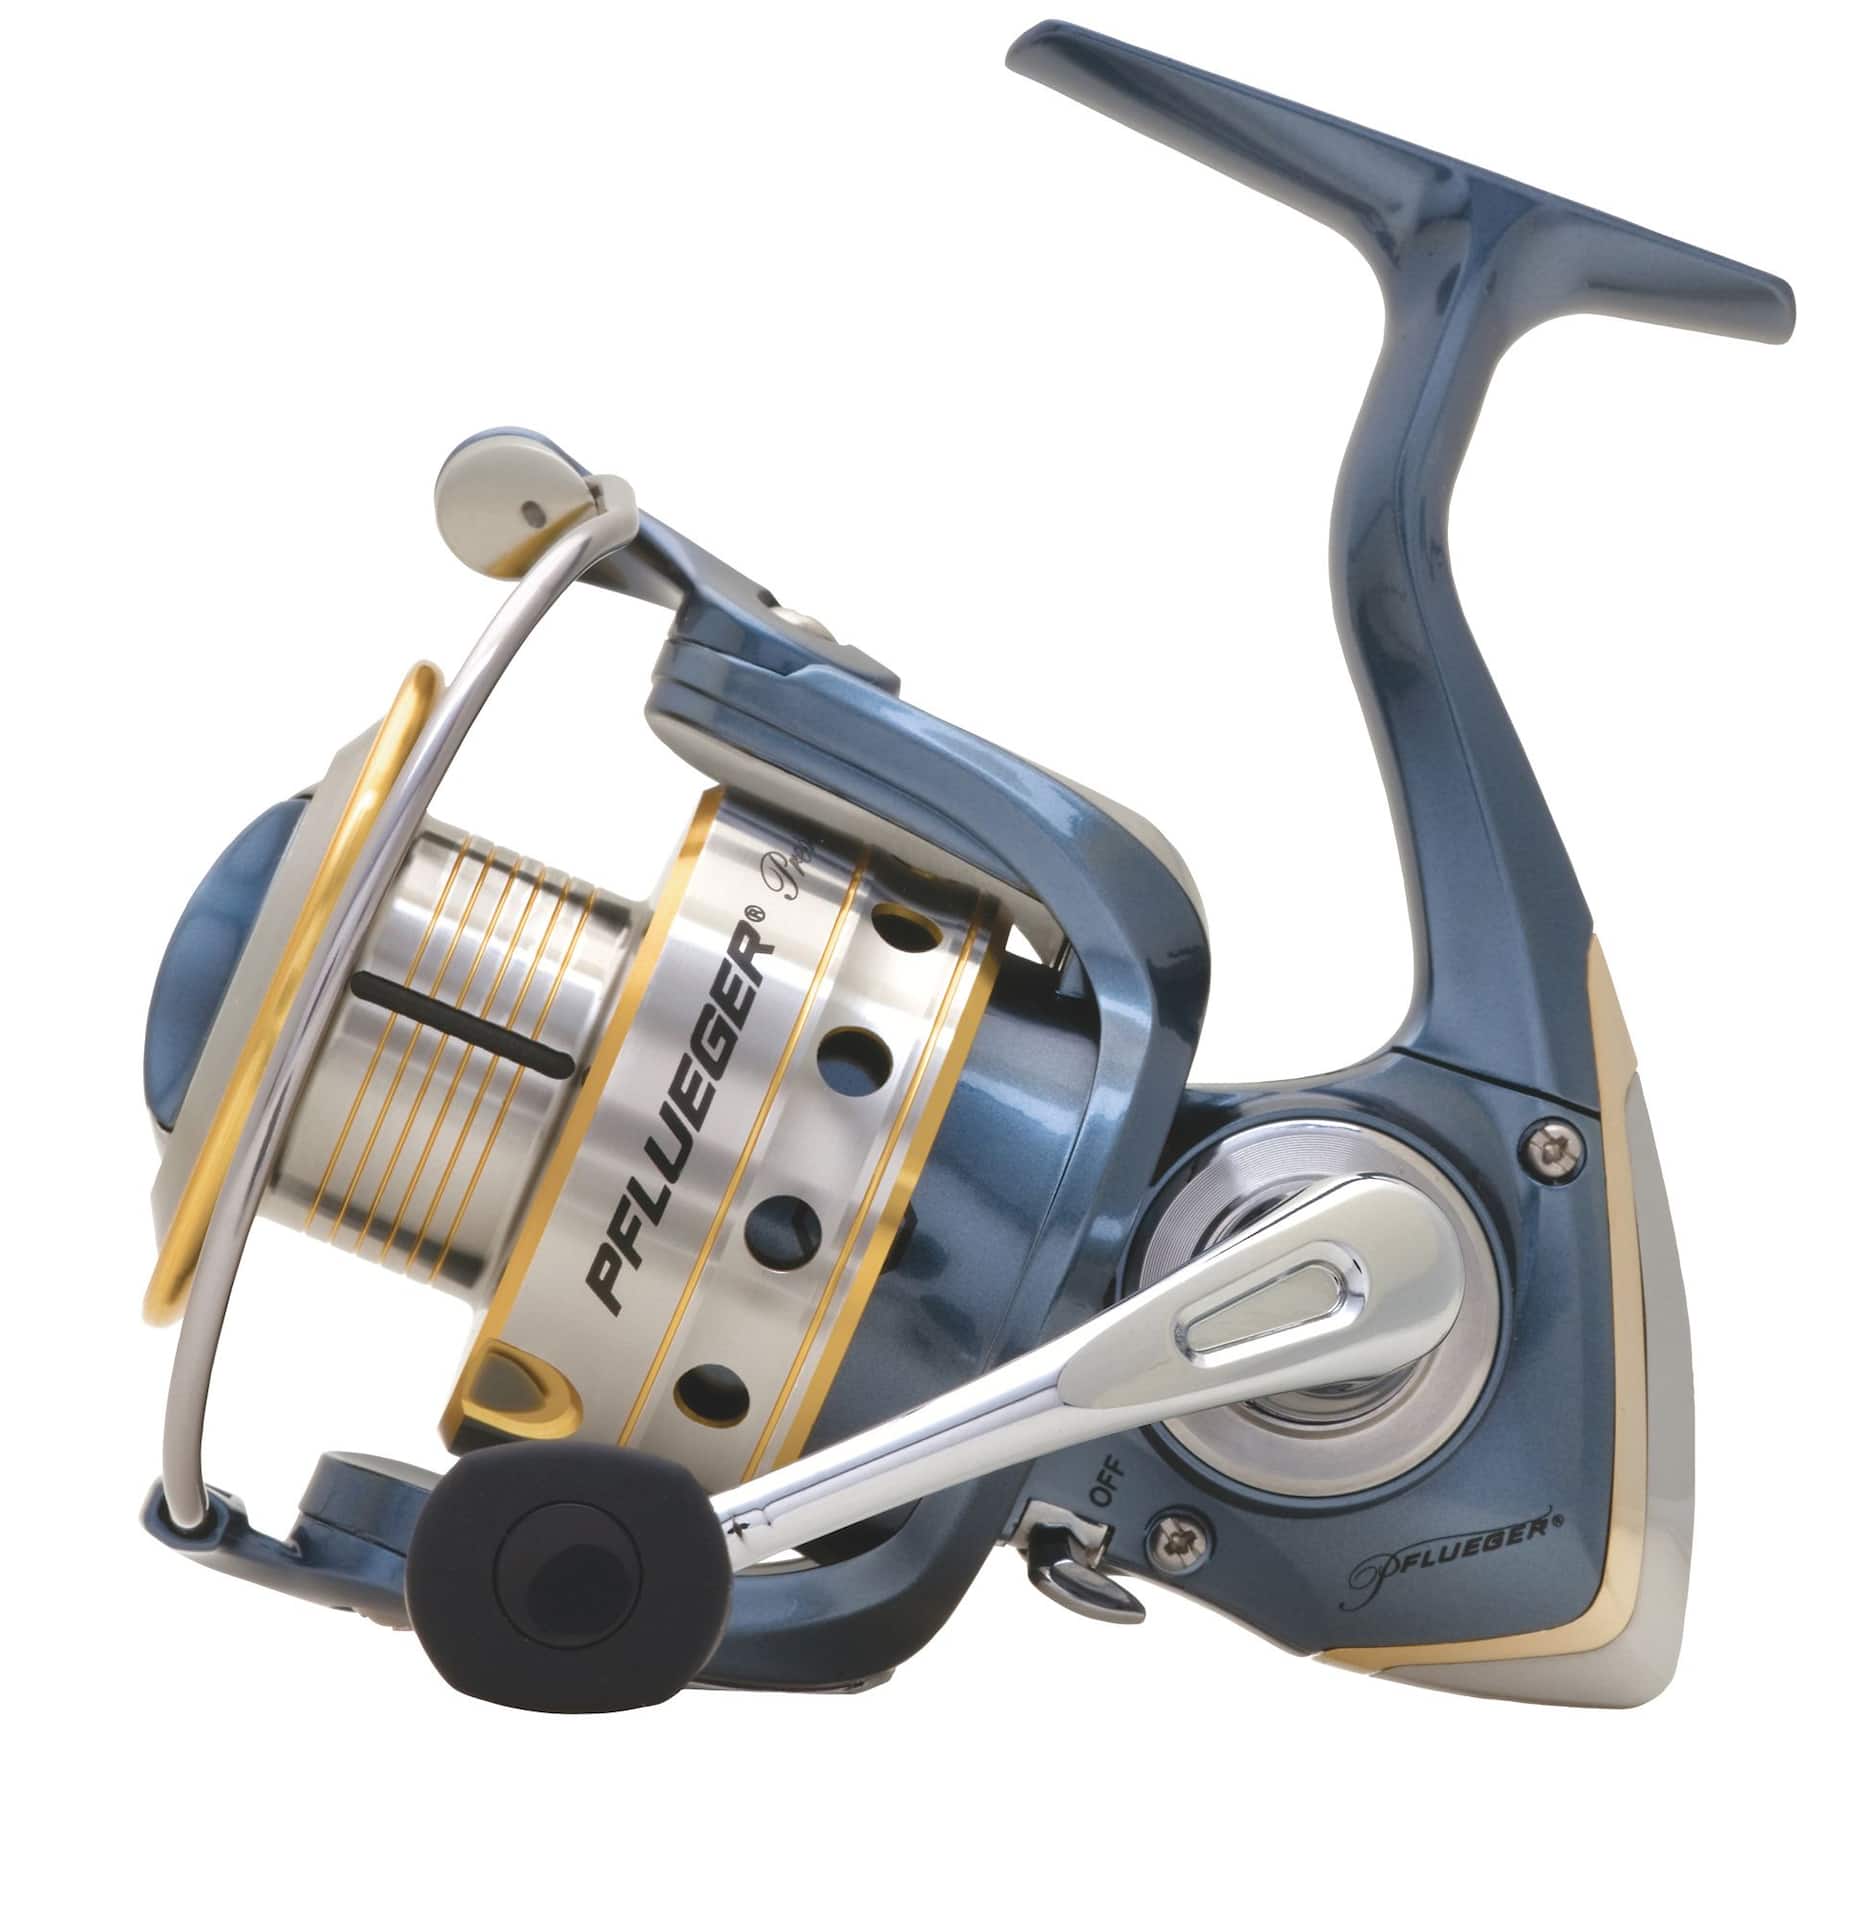 Why is this DAIWA reel $109.99 cost more than the Pflueger $69.95